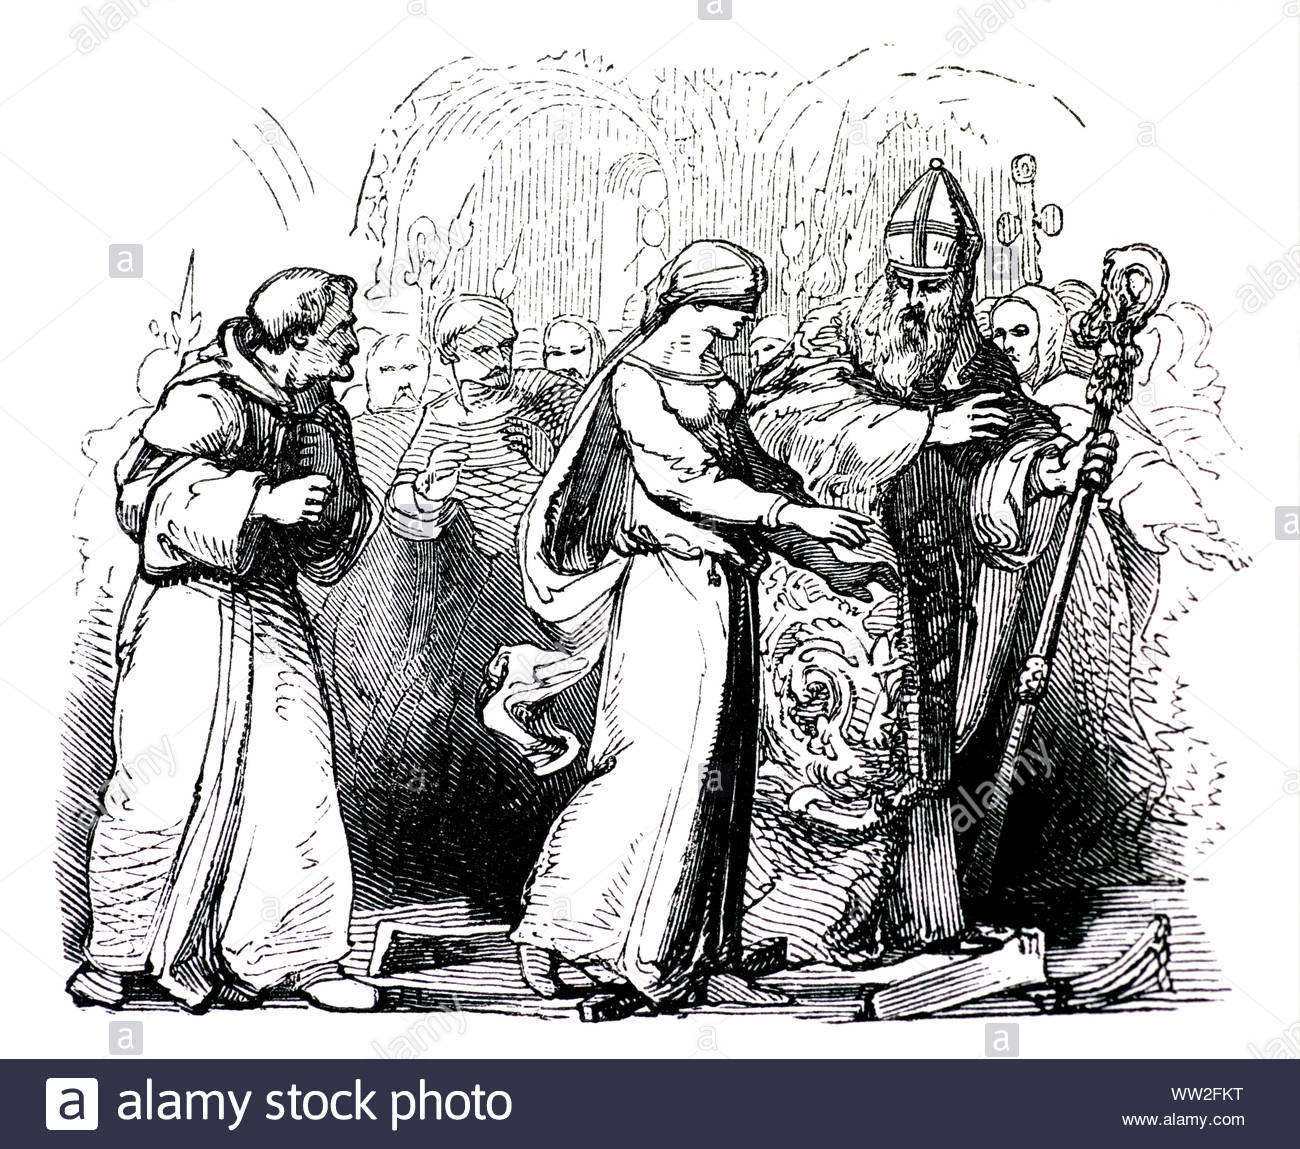 Queen Emma of Normandy, wife of King Canute, walking over red hot ploughshares, vintage illustration from 1850 Stock Photo